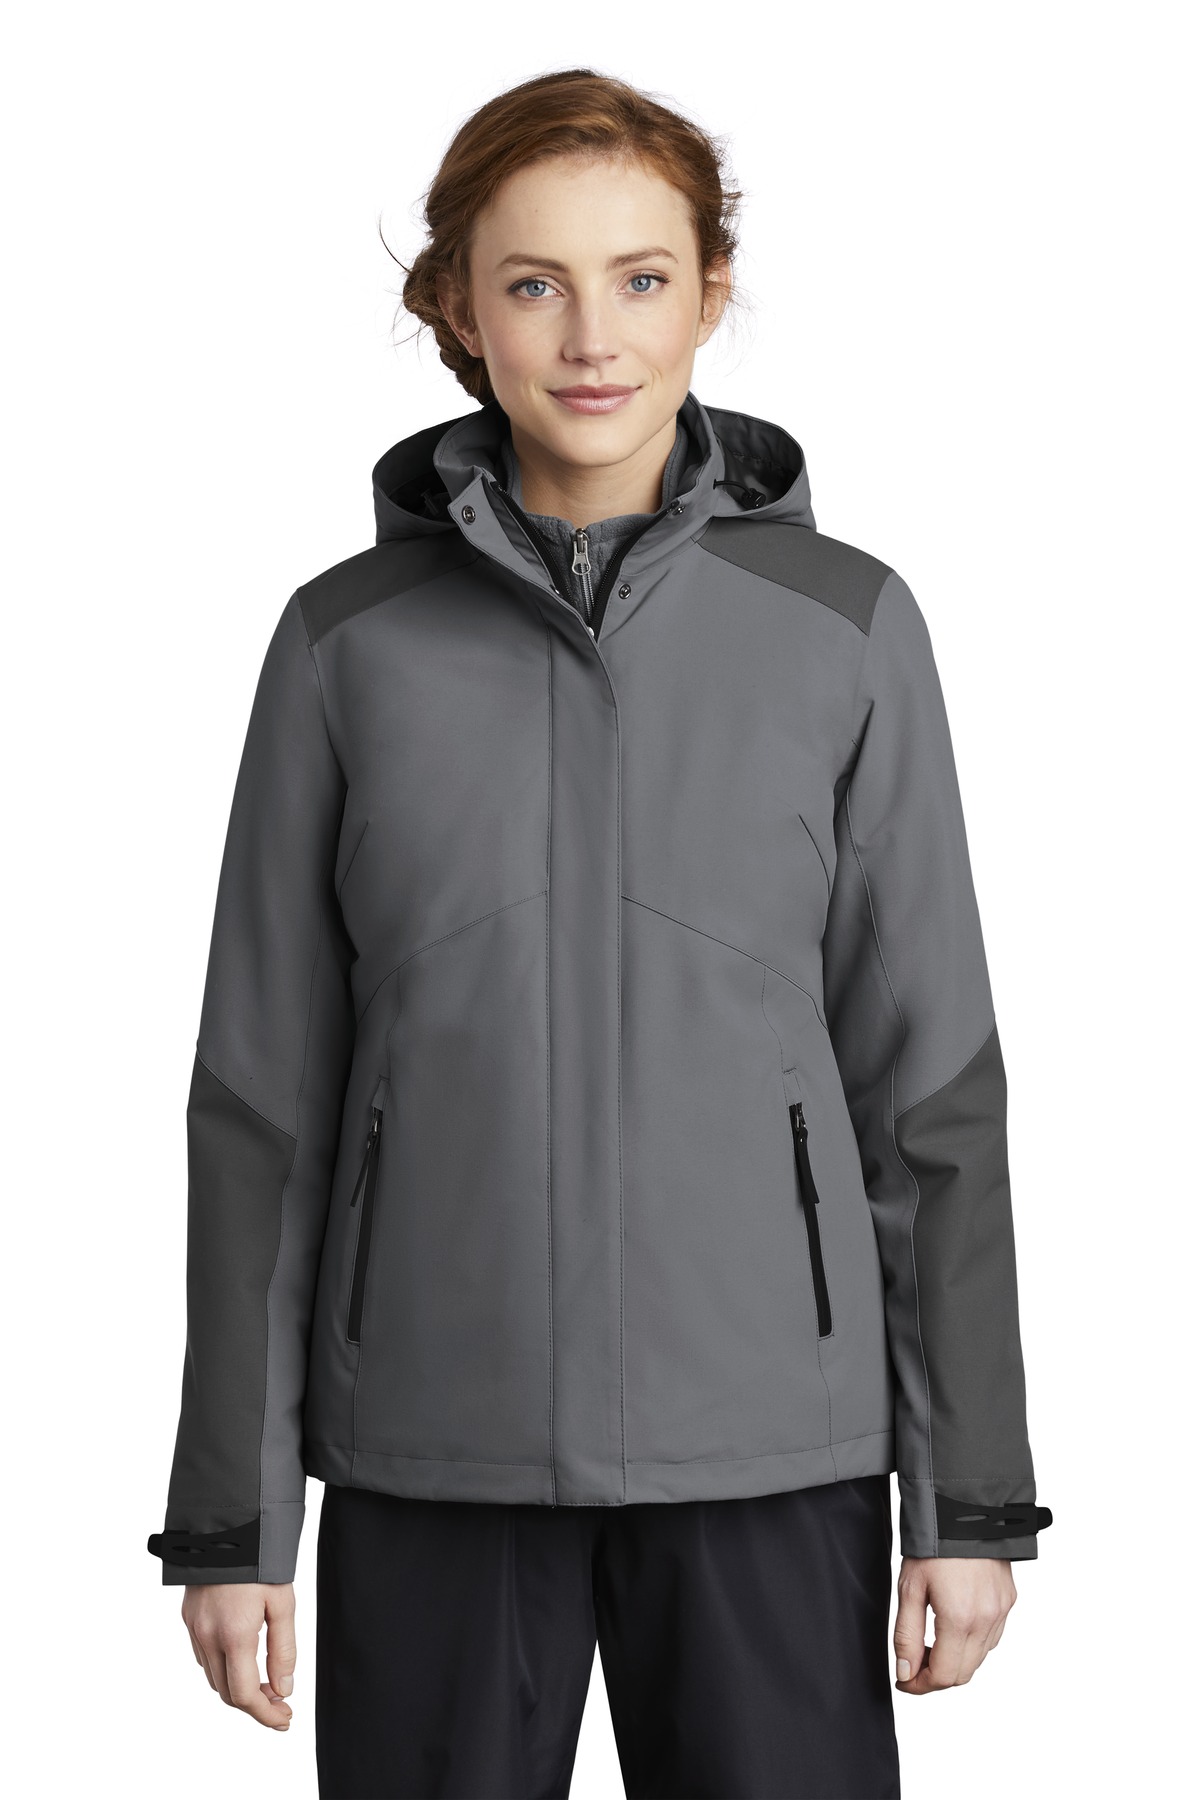 Port Authority Ladies Insulated Waterproof Tech Jacket L405 - image 1 of 3